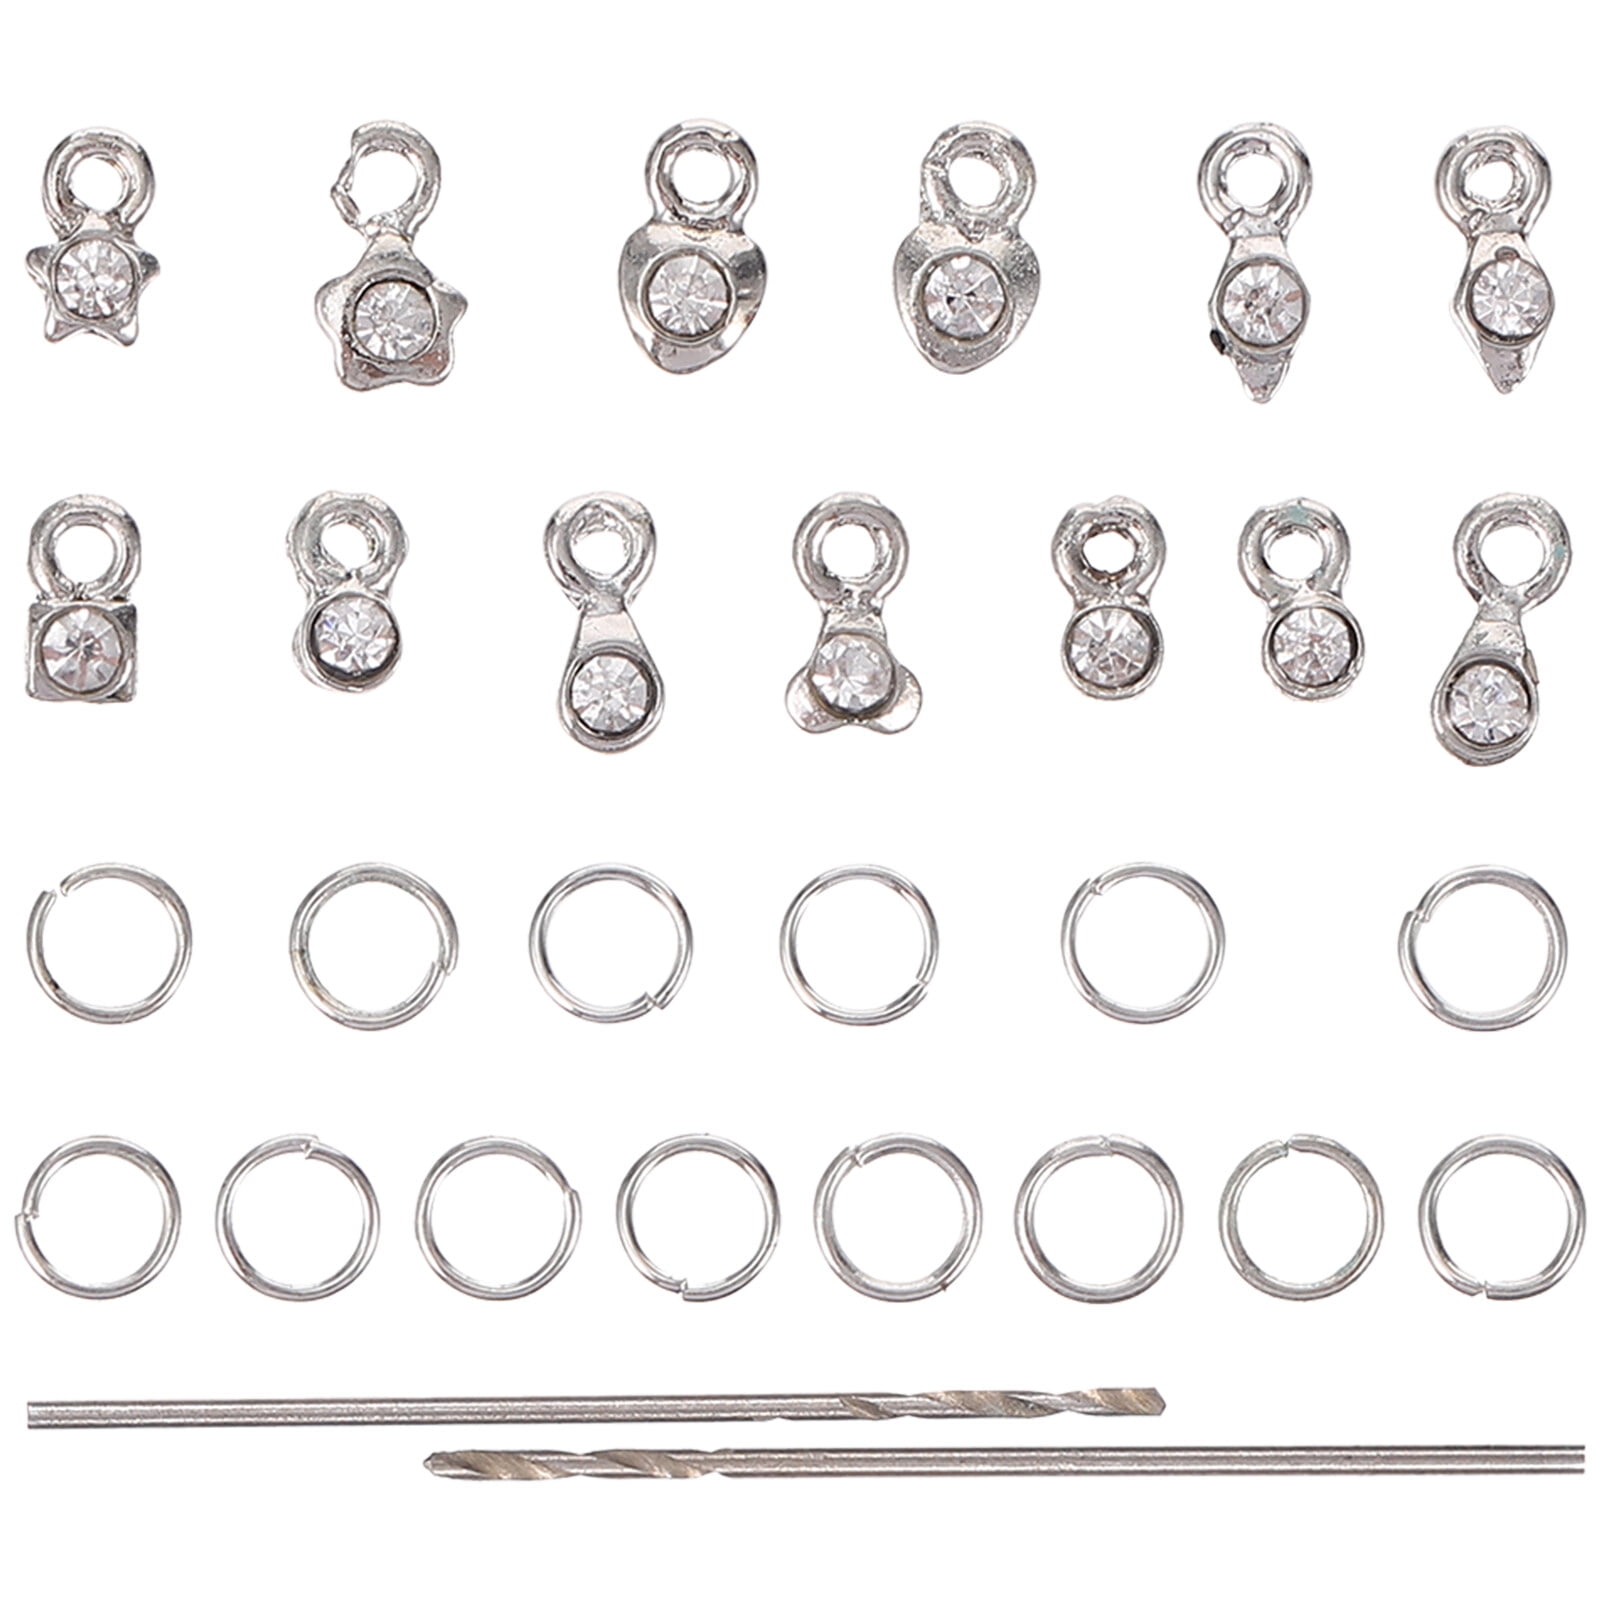  Lurrose Nail Piercing Tool, 24pcs Nail Art Dangle Charms Nail  Jewelry Rings with Nail Piercing Tool for Tips Acrylic Gel Nail : Beauty &  Personal Care